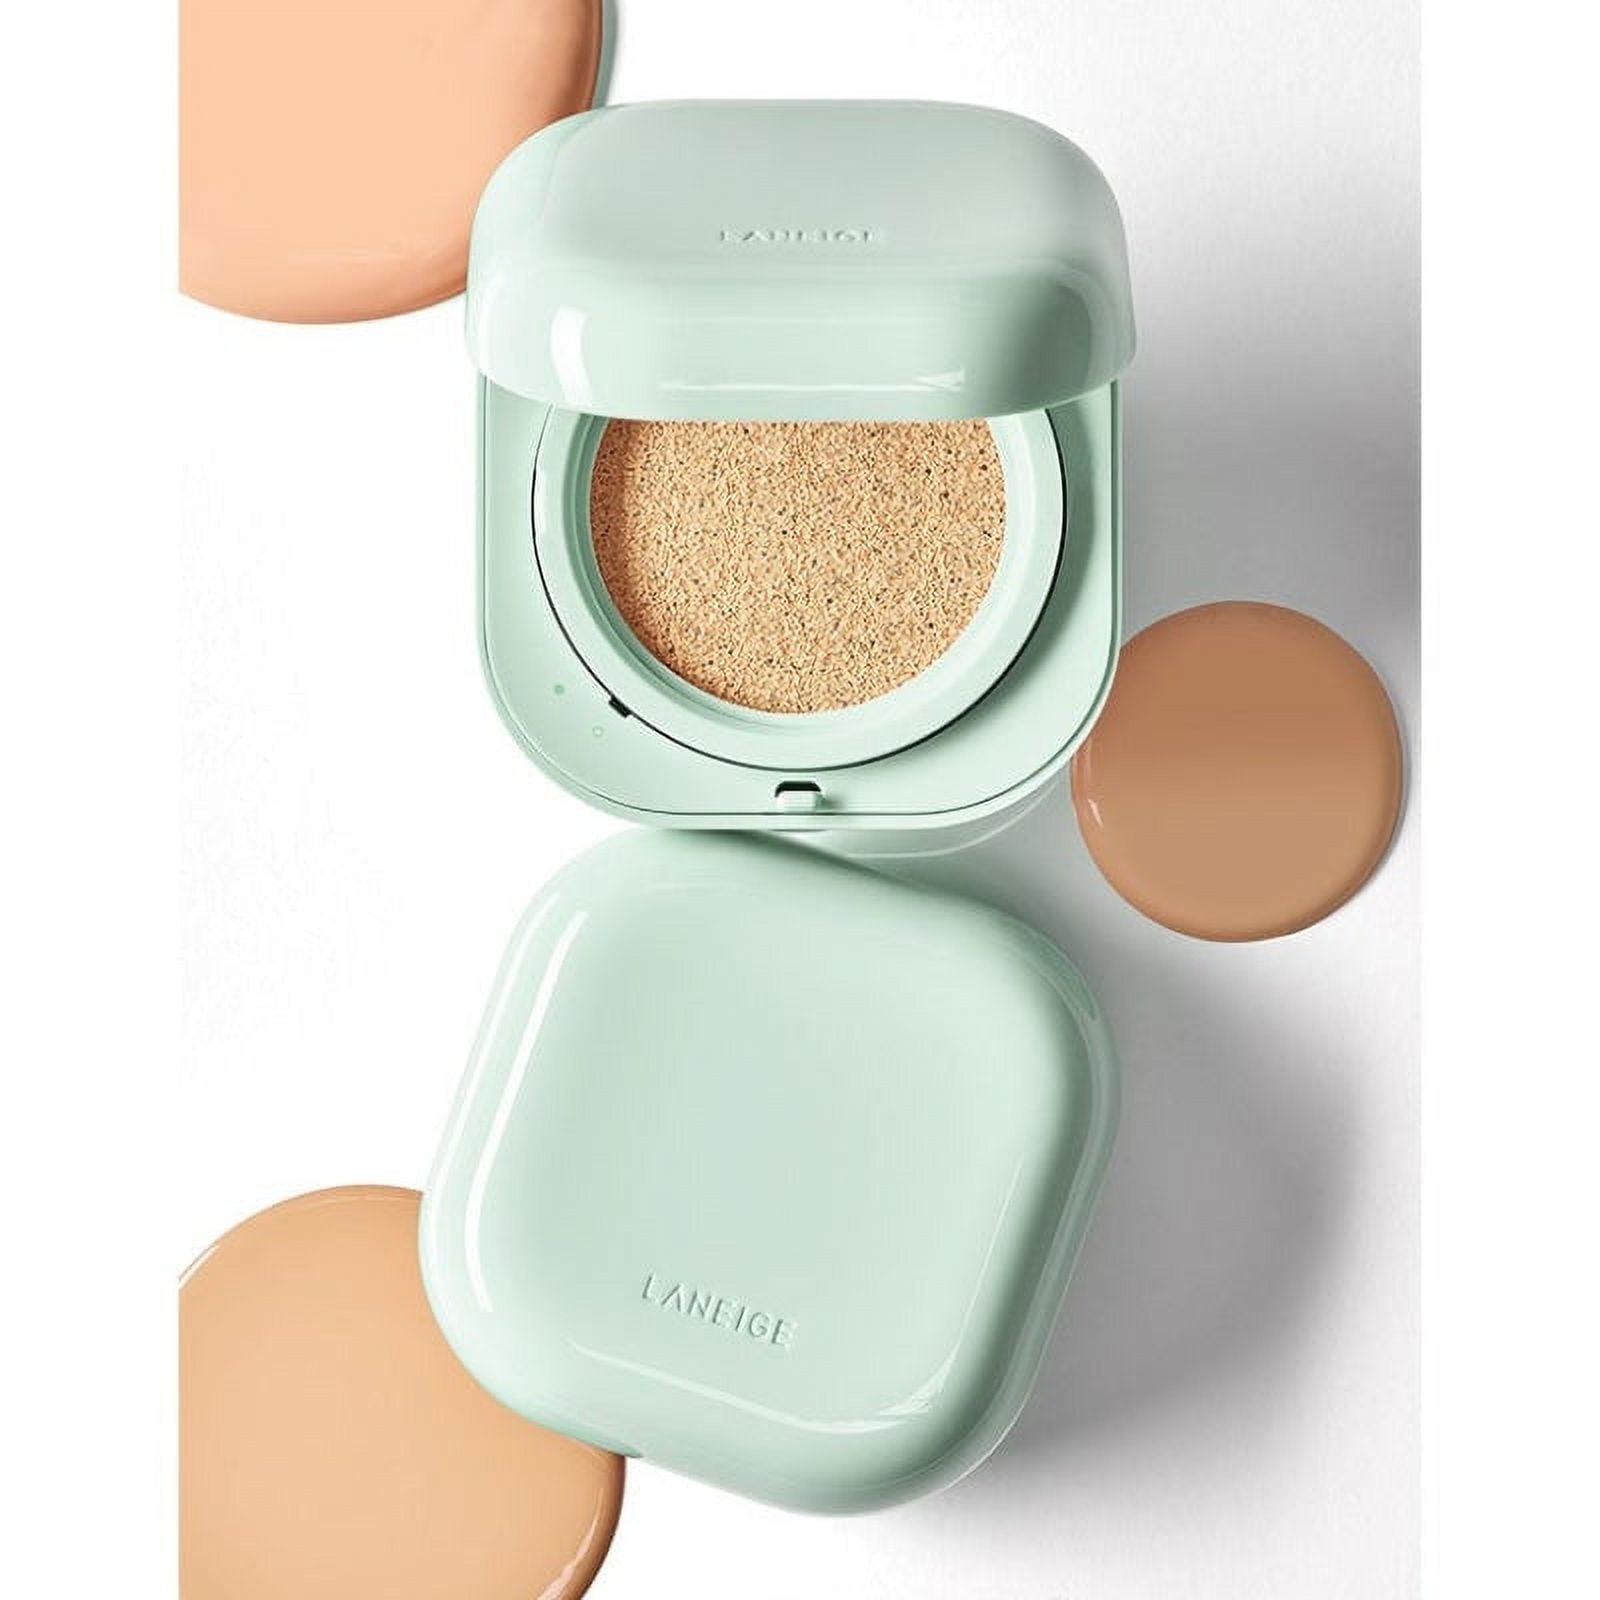 🌟LANEIGE NEO CUSHION 20% OFF🌟 **END